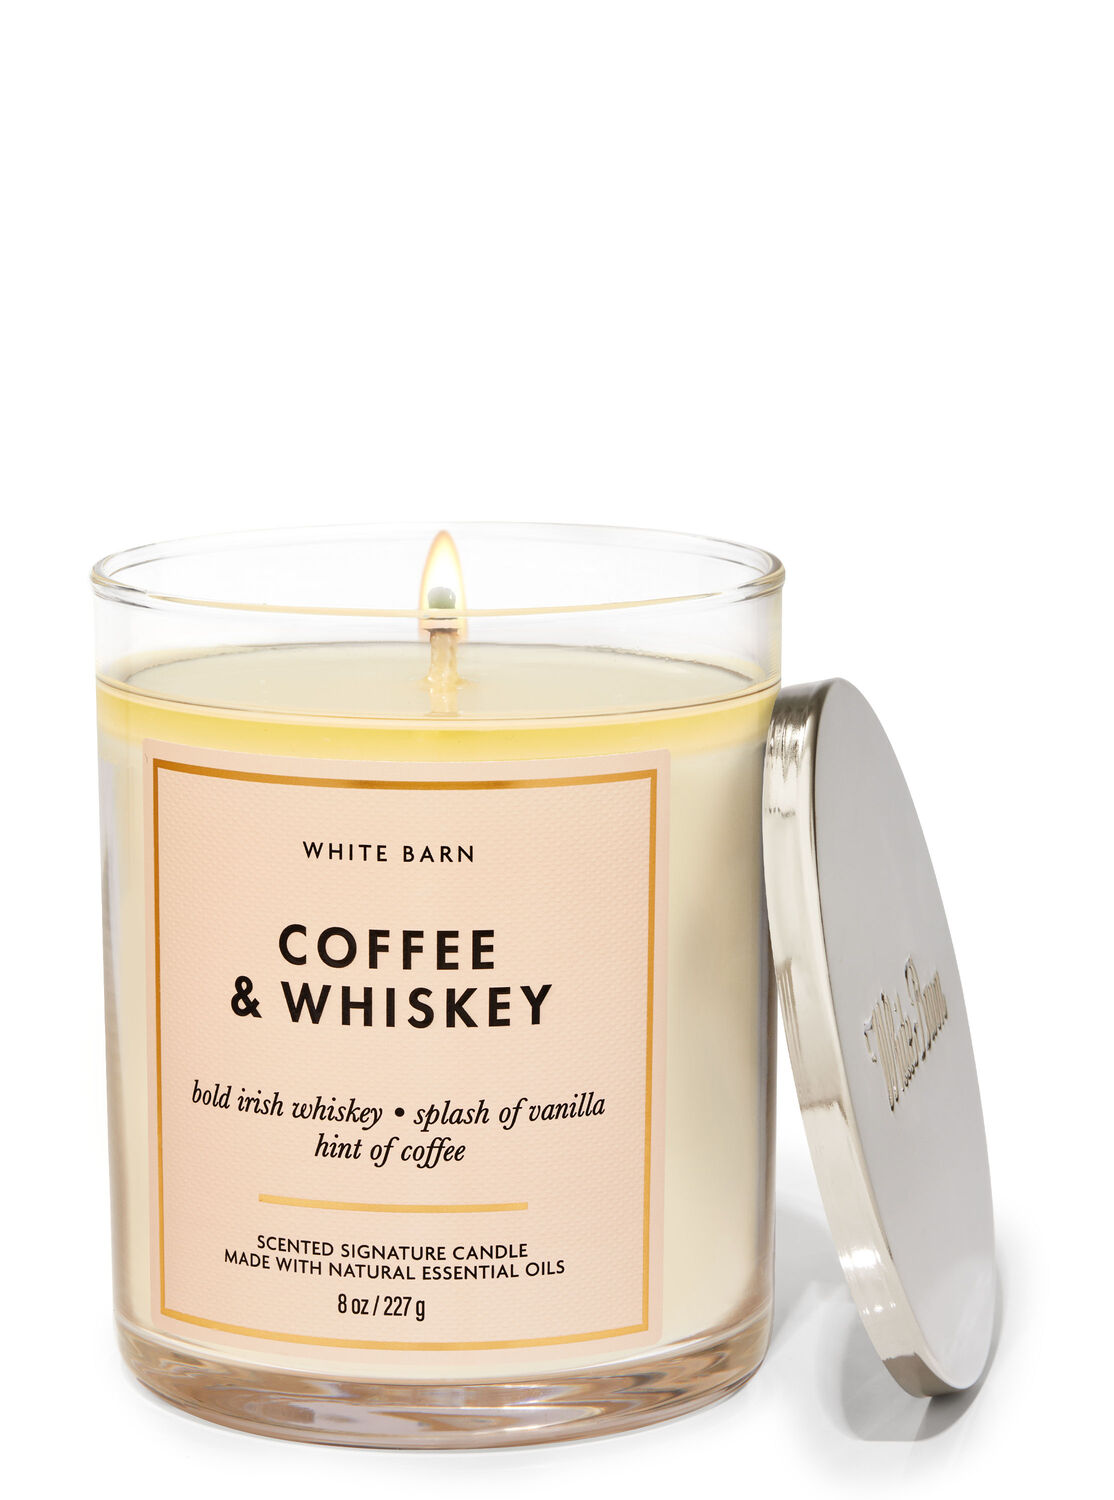  White Barn Bath and Body Works, 1-Wick Candle w/Essential Oils  - 7 oz - Many Scents! (Mahogany Teakwood) : Health & Household